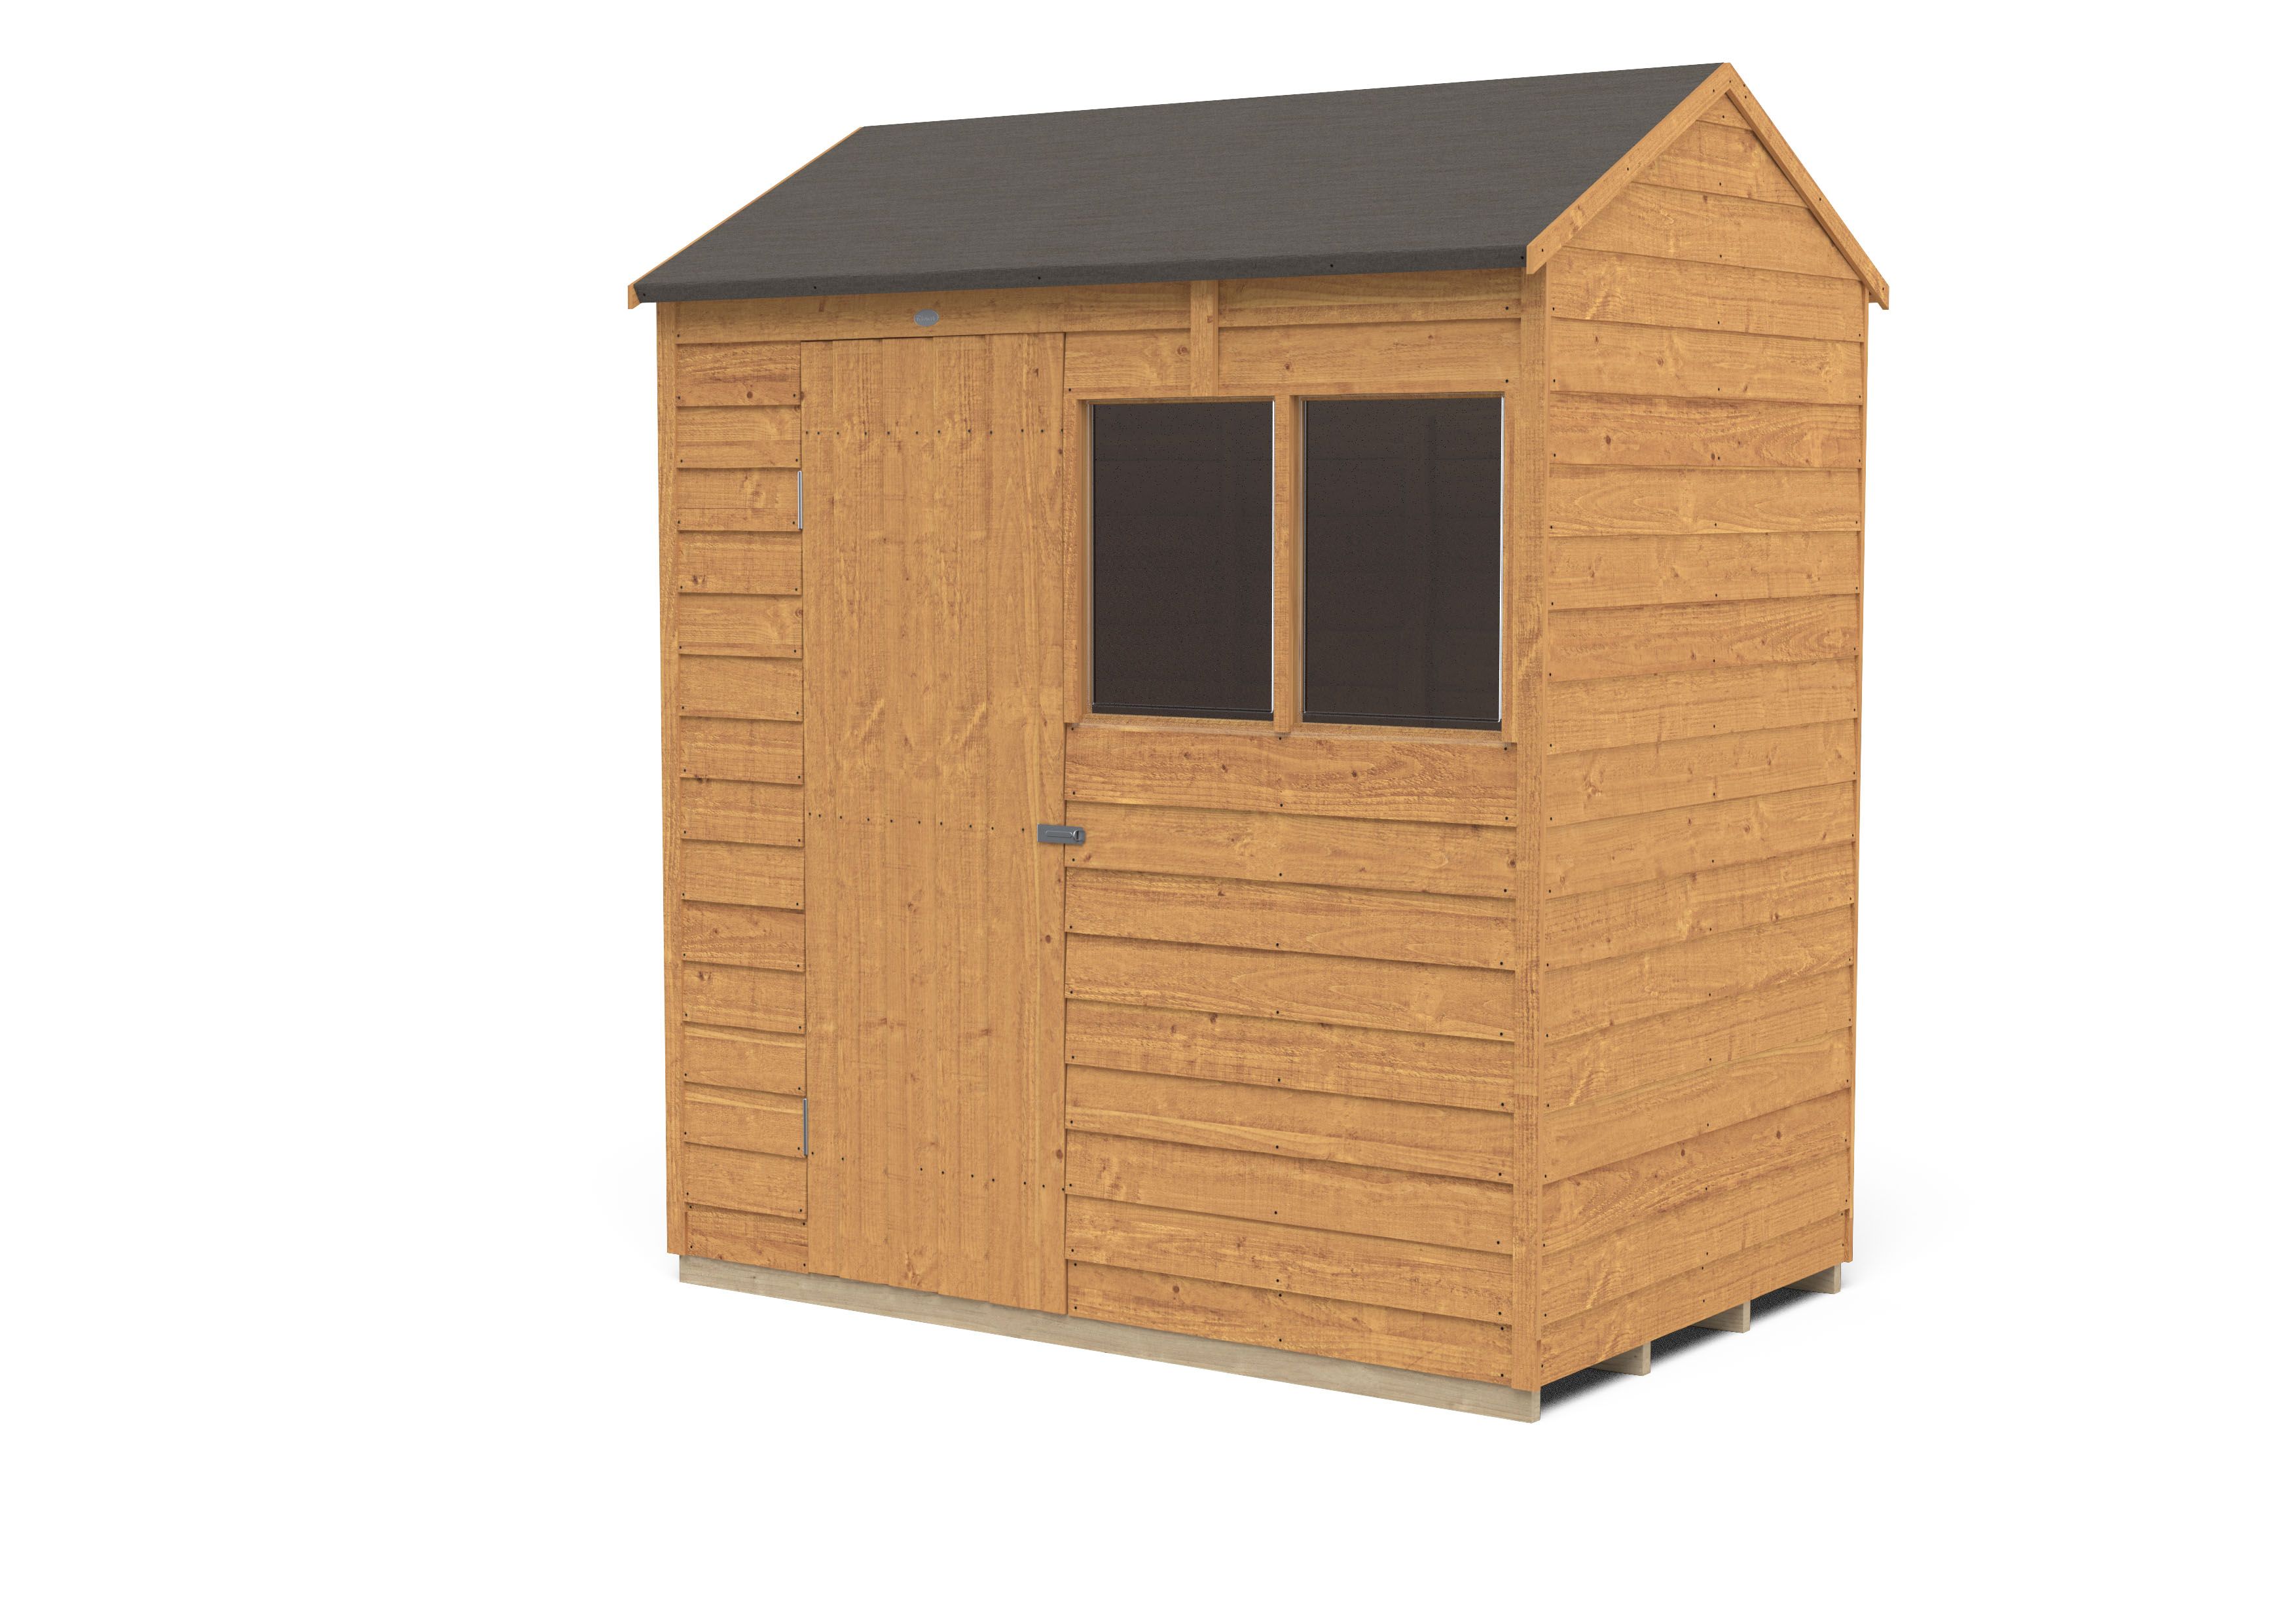 Forest Garden 6x4 ft Reverse apex Wooden Shed with floor & 2 windows - Assembly service included